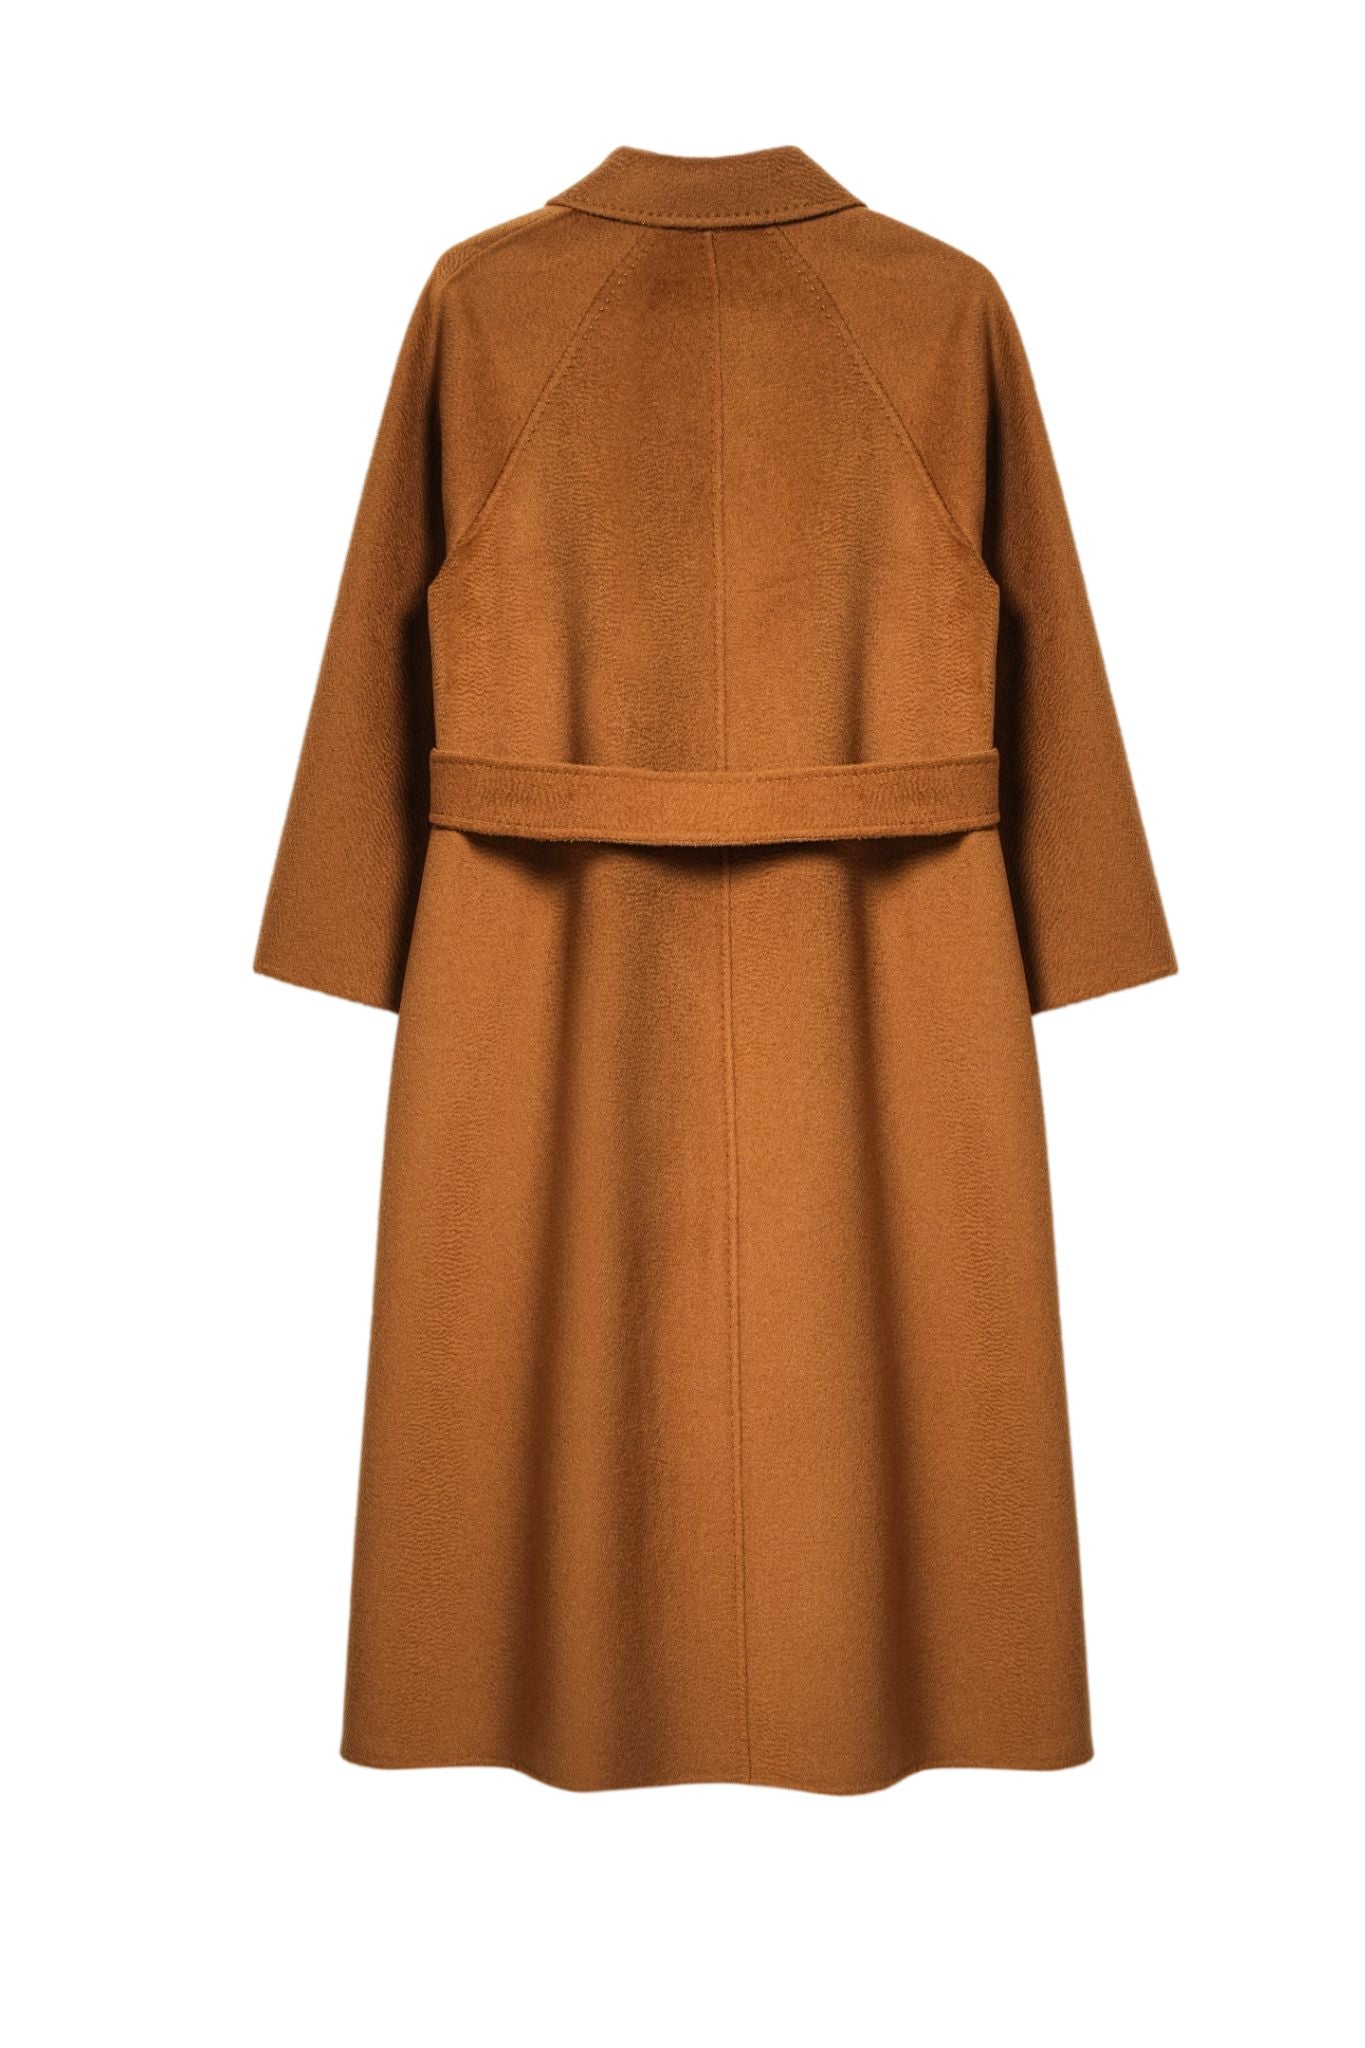 Classic Chic: The Long Cashmere Coat Edit for Women